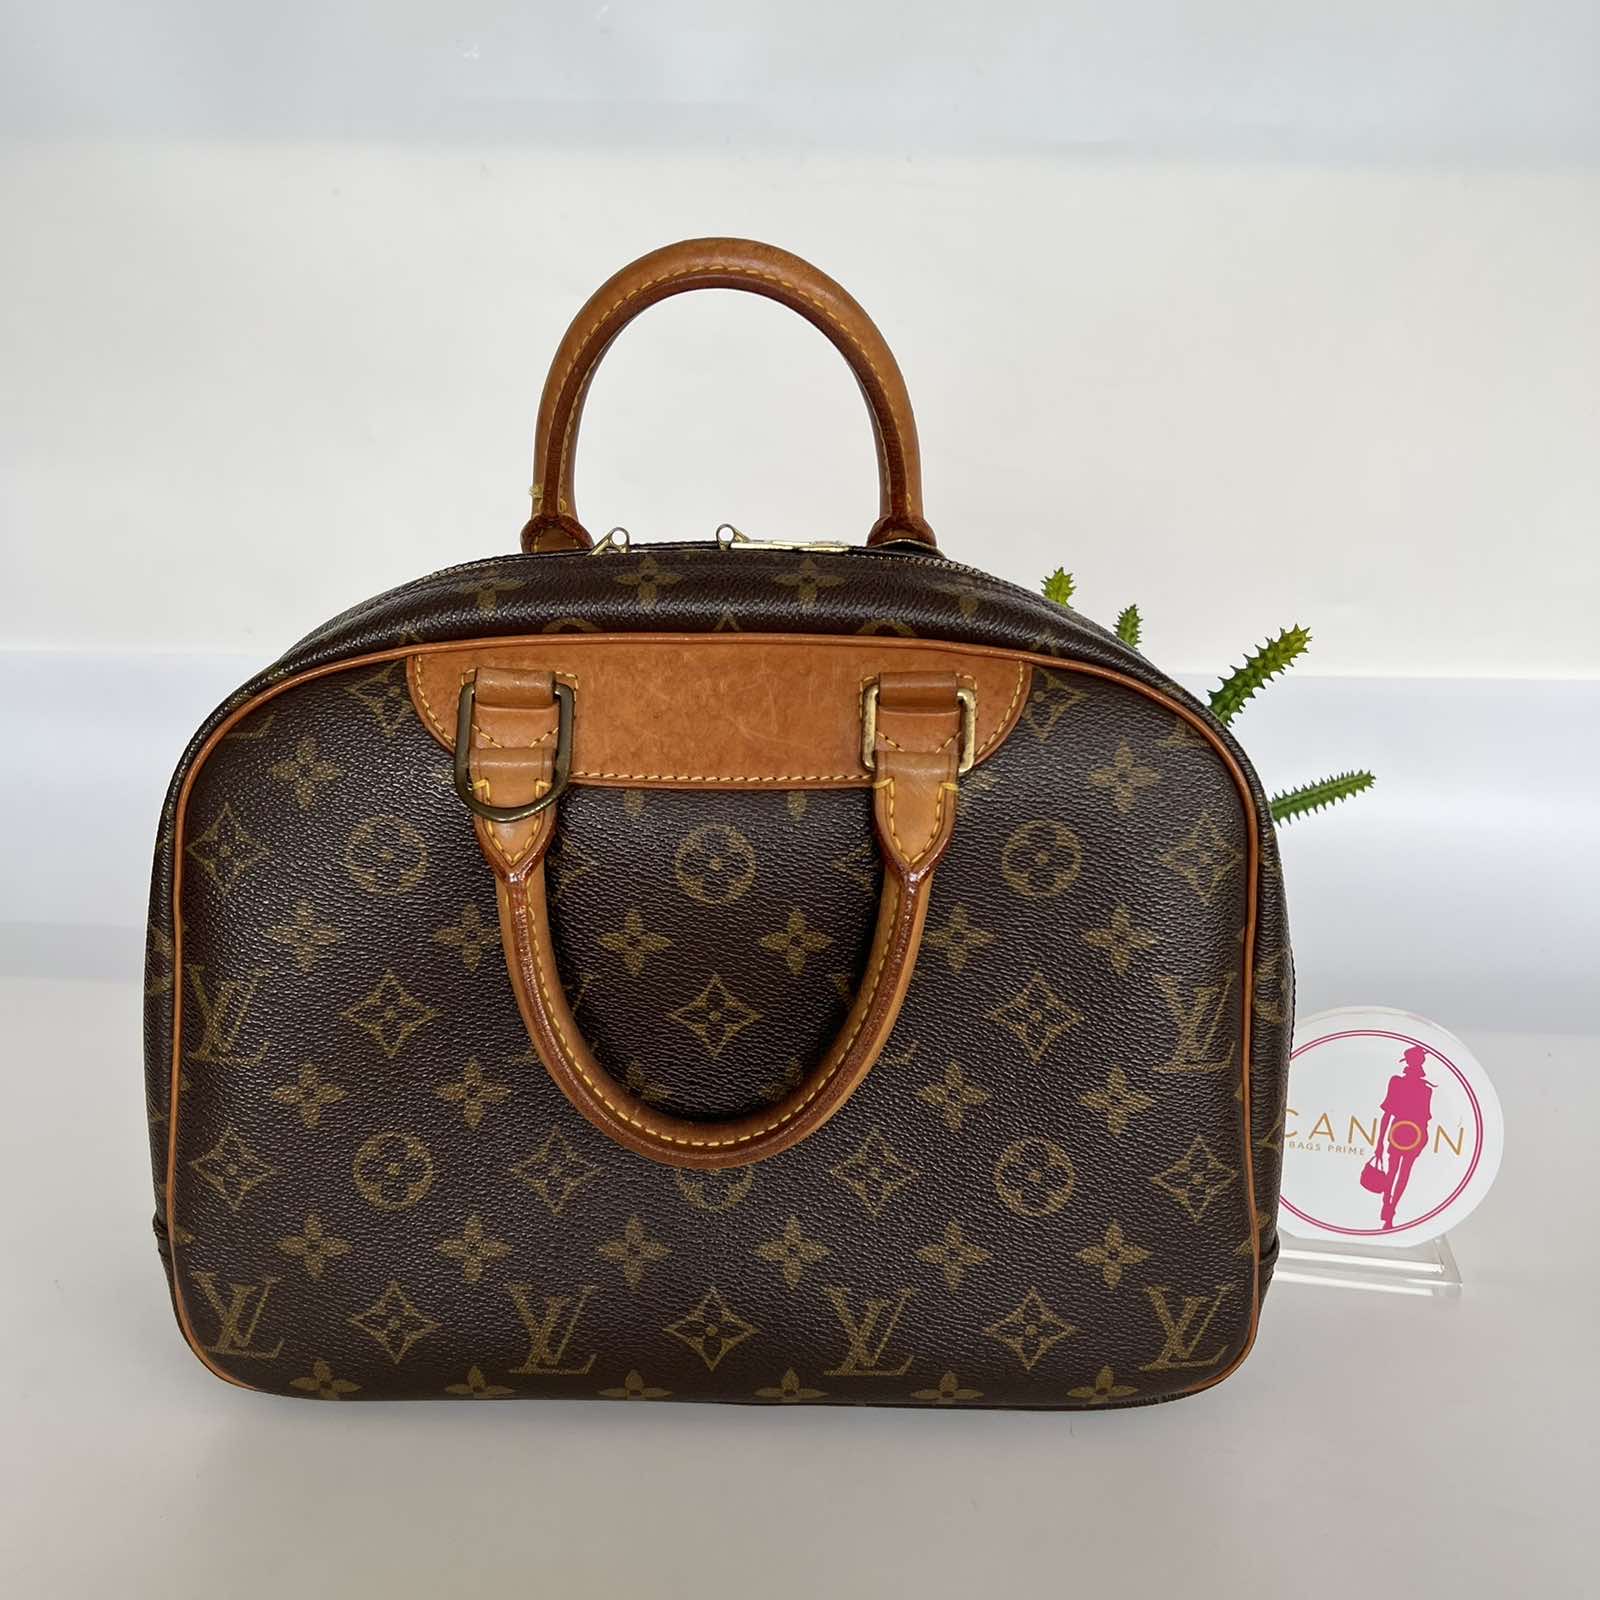 Louis Vuitton Monogram Canvas Pochette Accessoires. DC: SD0020. Made in  U.S.A. With certificate of authenticity from ENTRUPY ❤️ - Canon E-Bags Prime